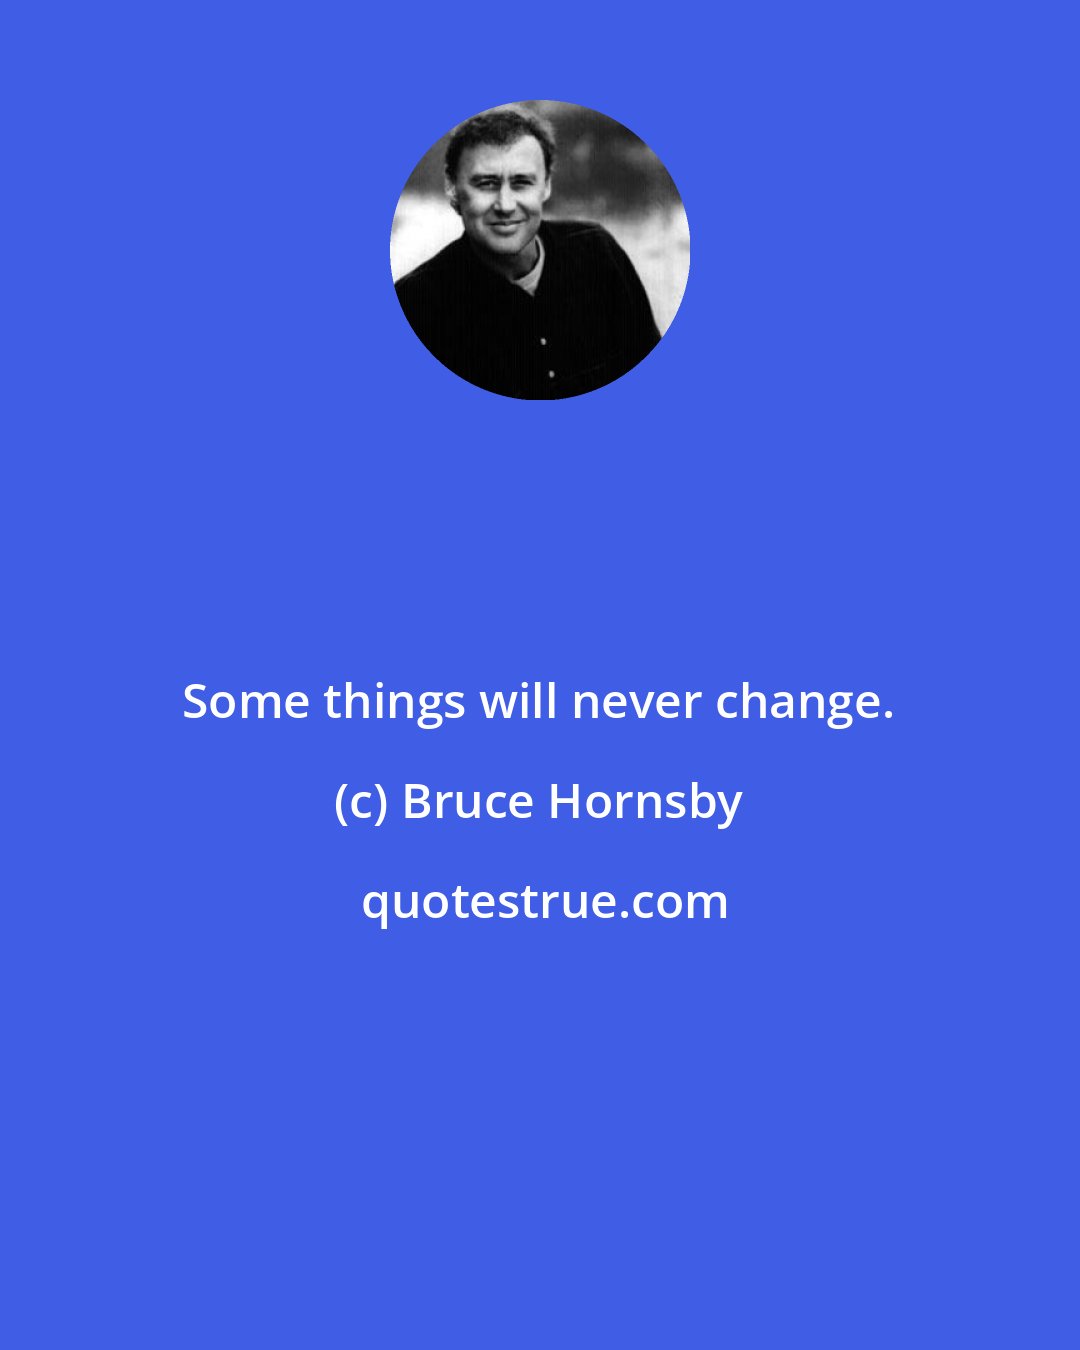 Bruce Hornsby: Some things will never change.